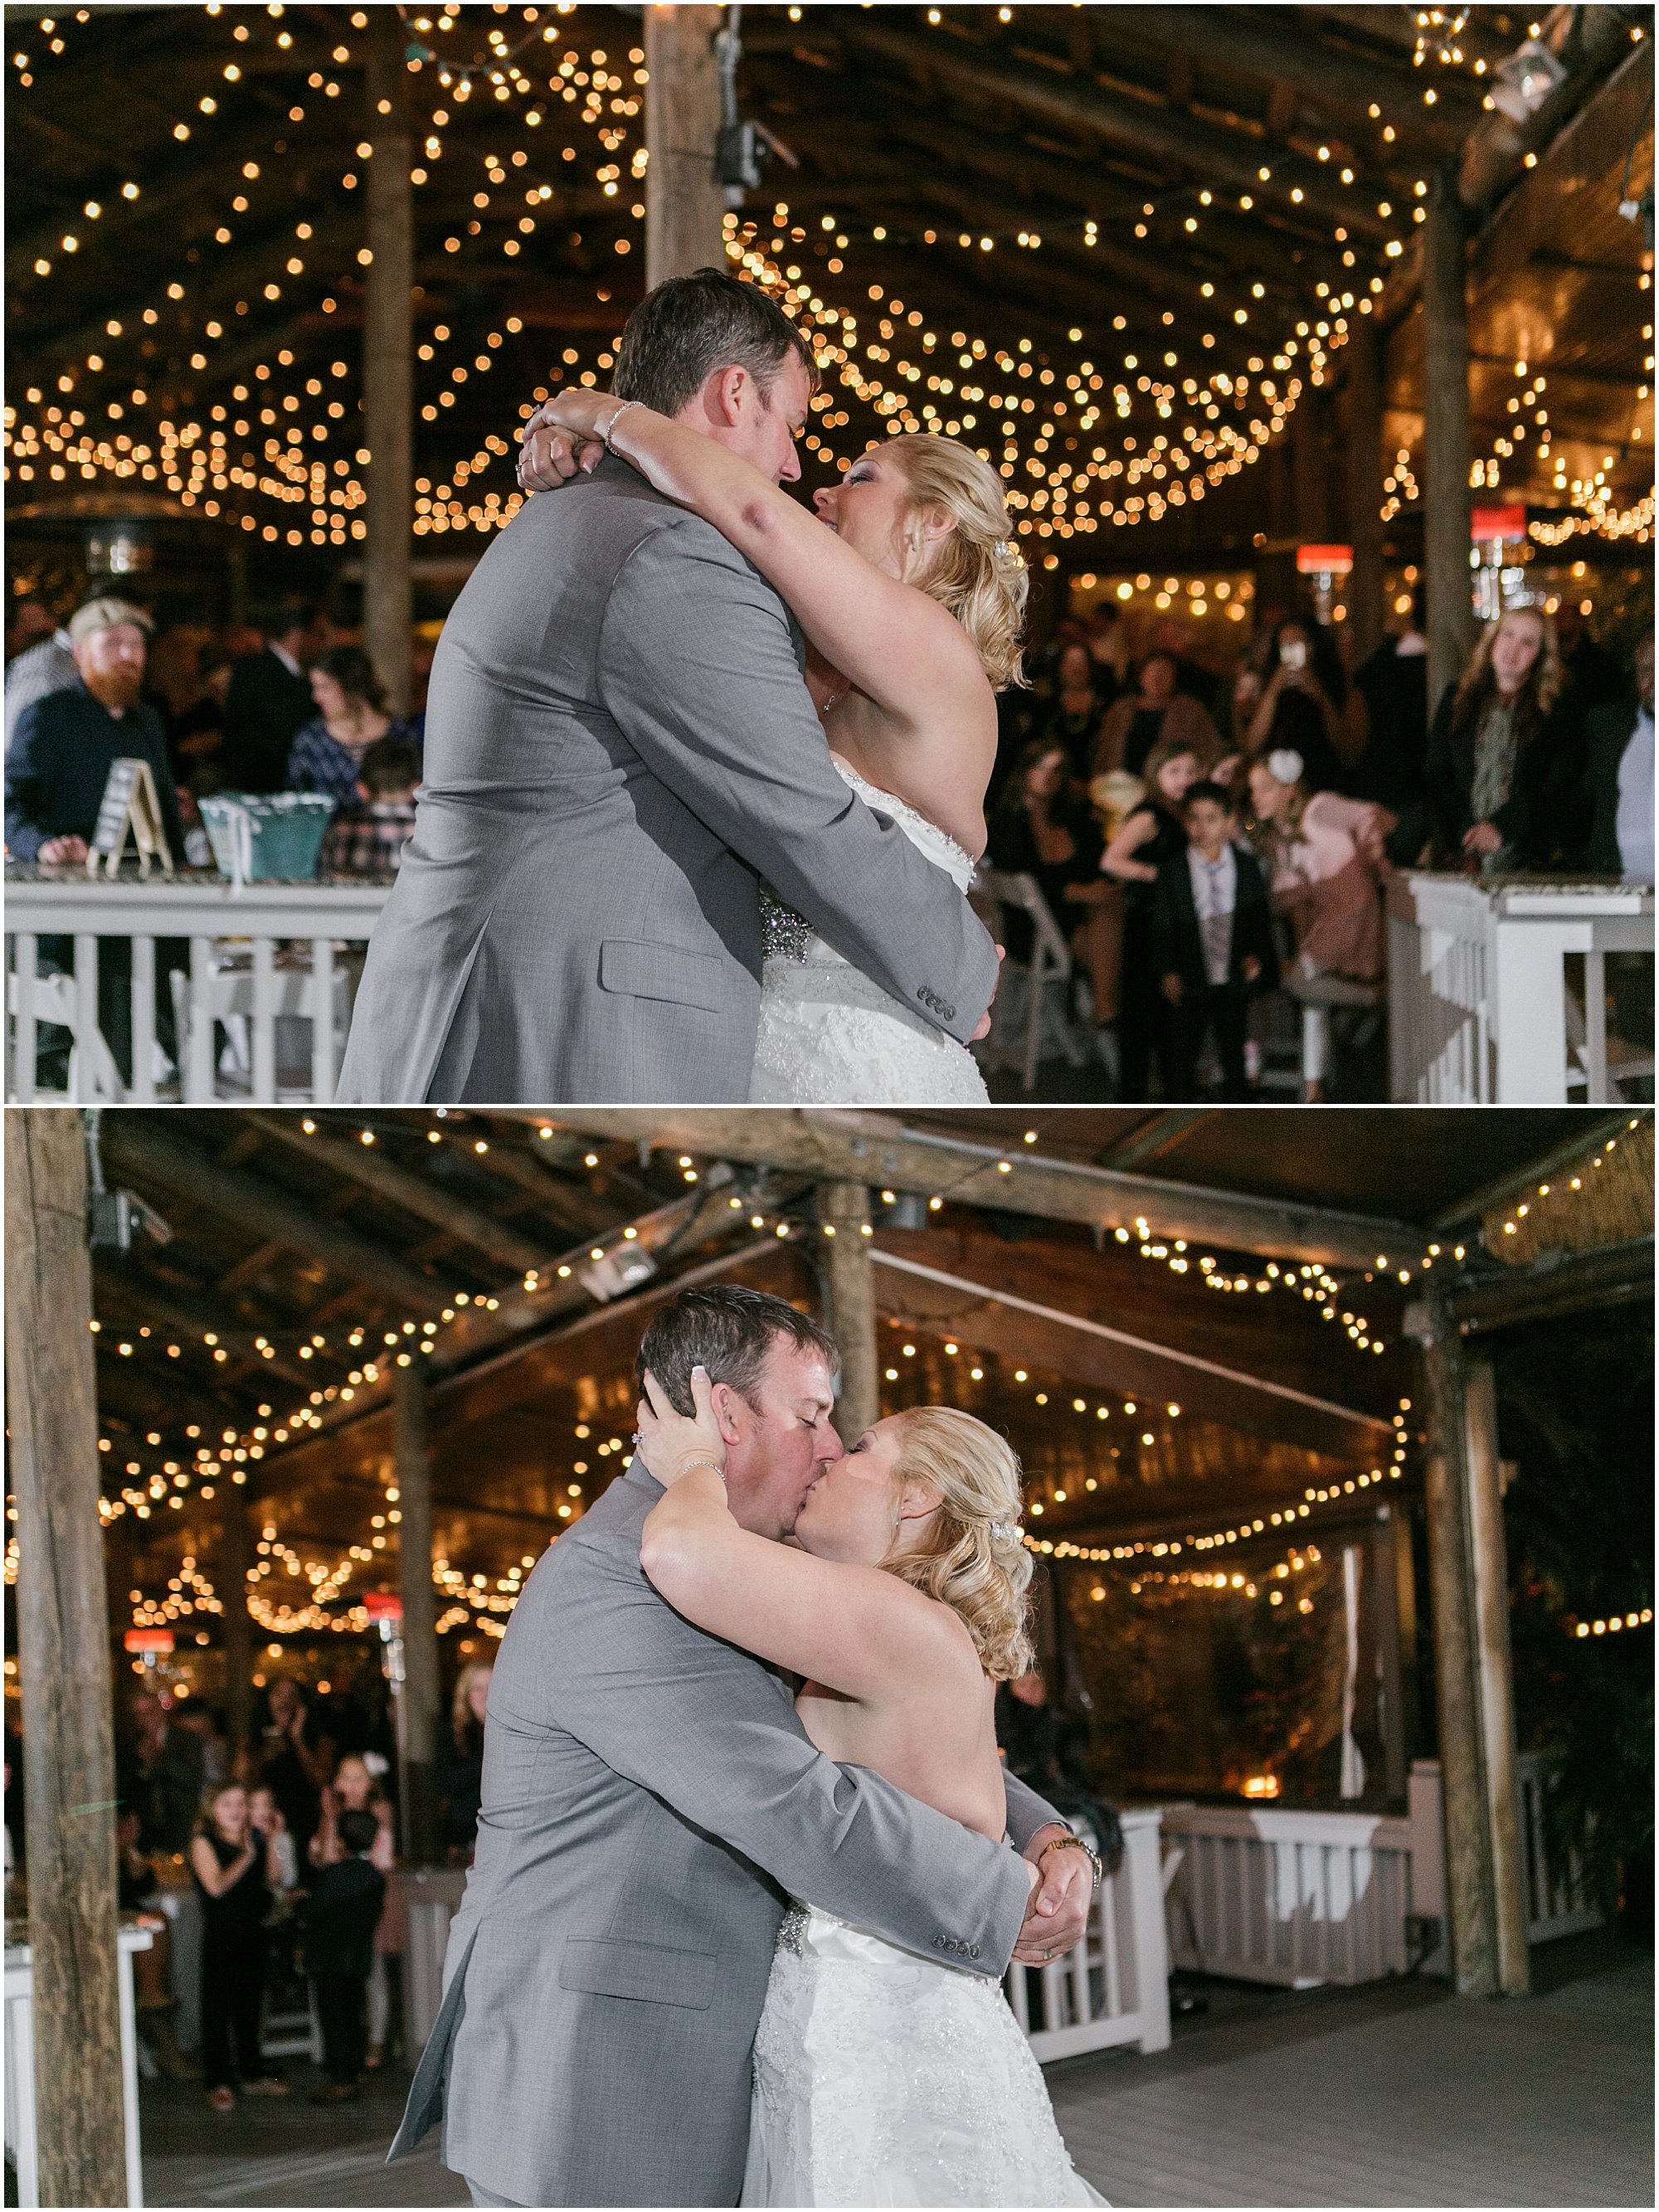 Bride and groom dancing for the first time as a married couple.